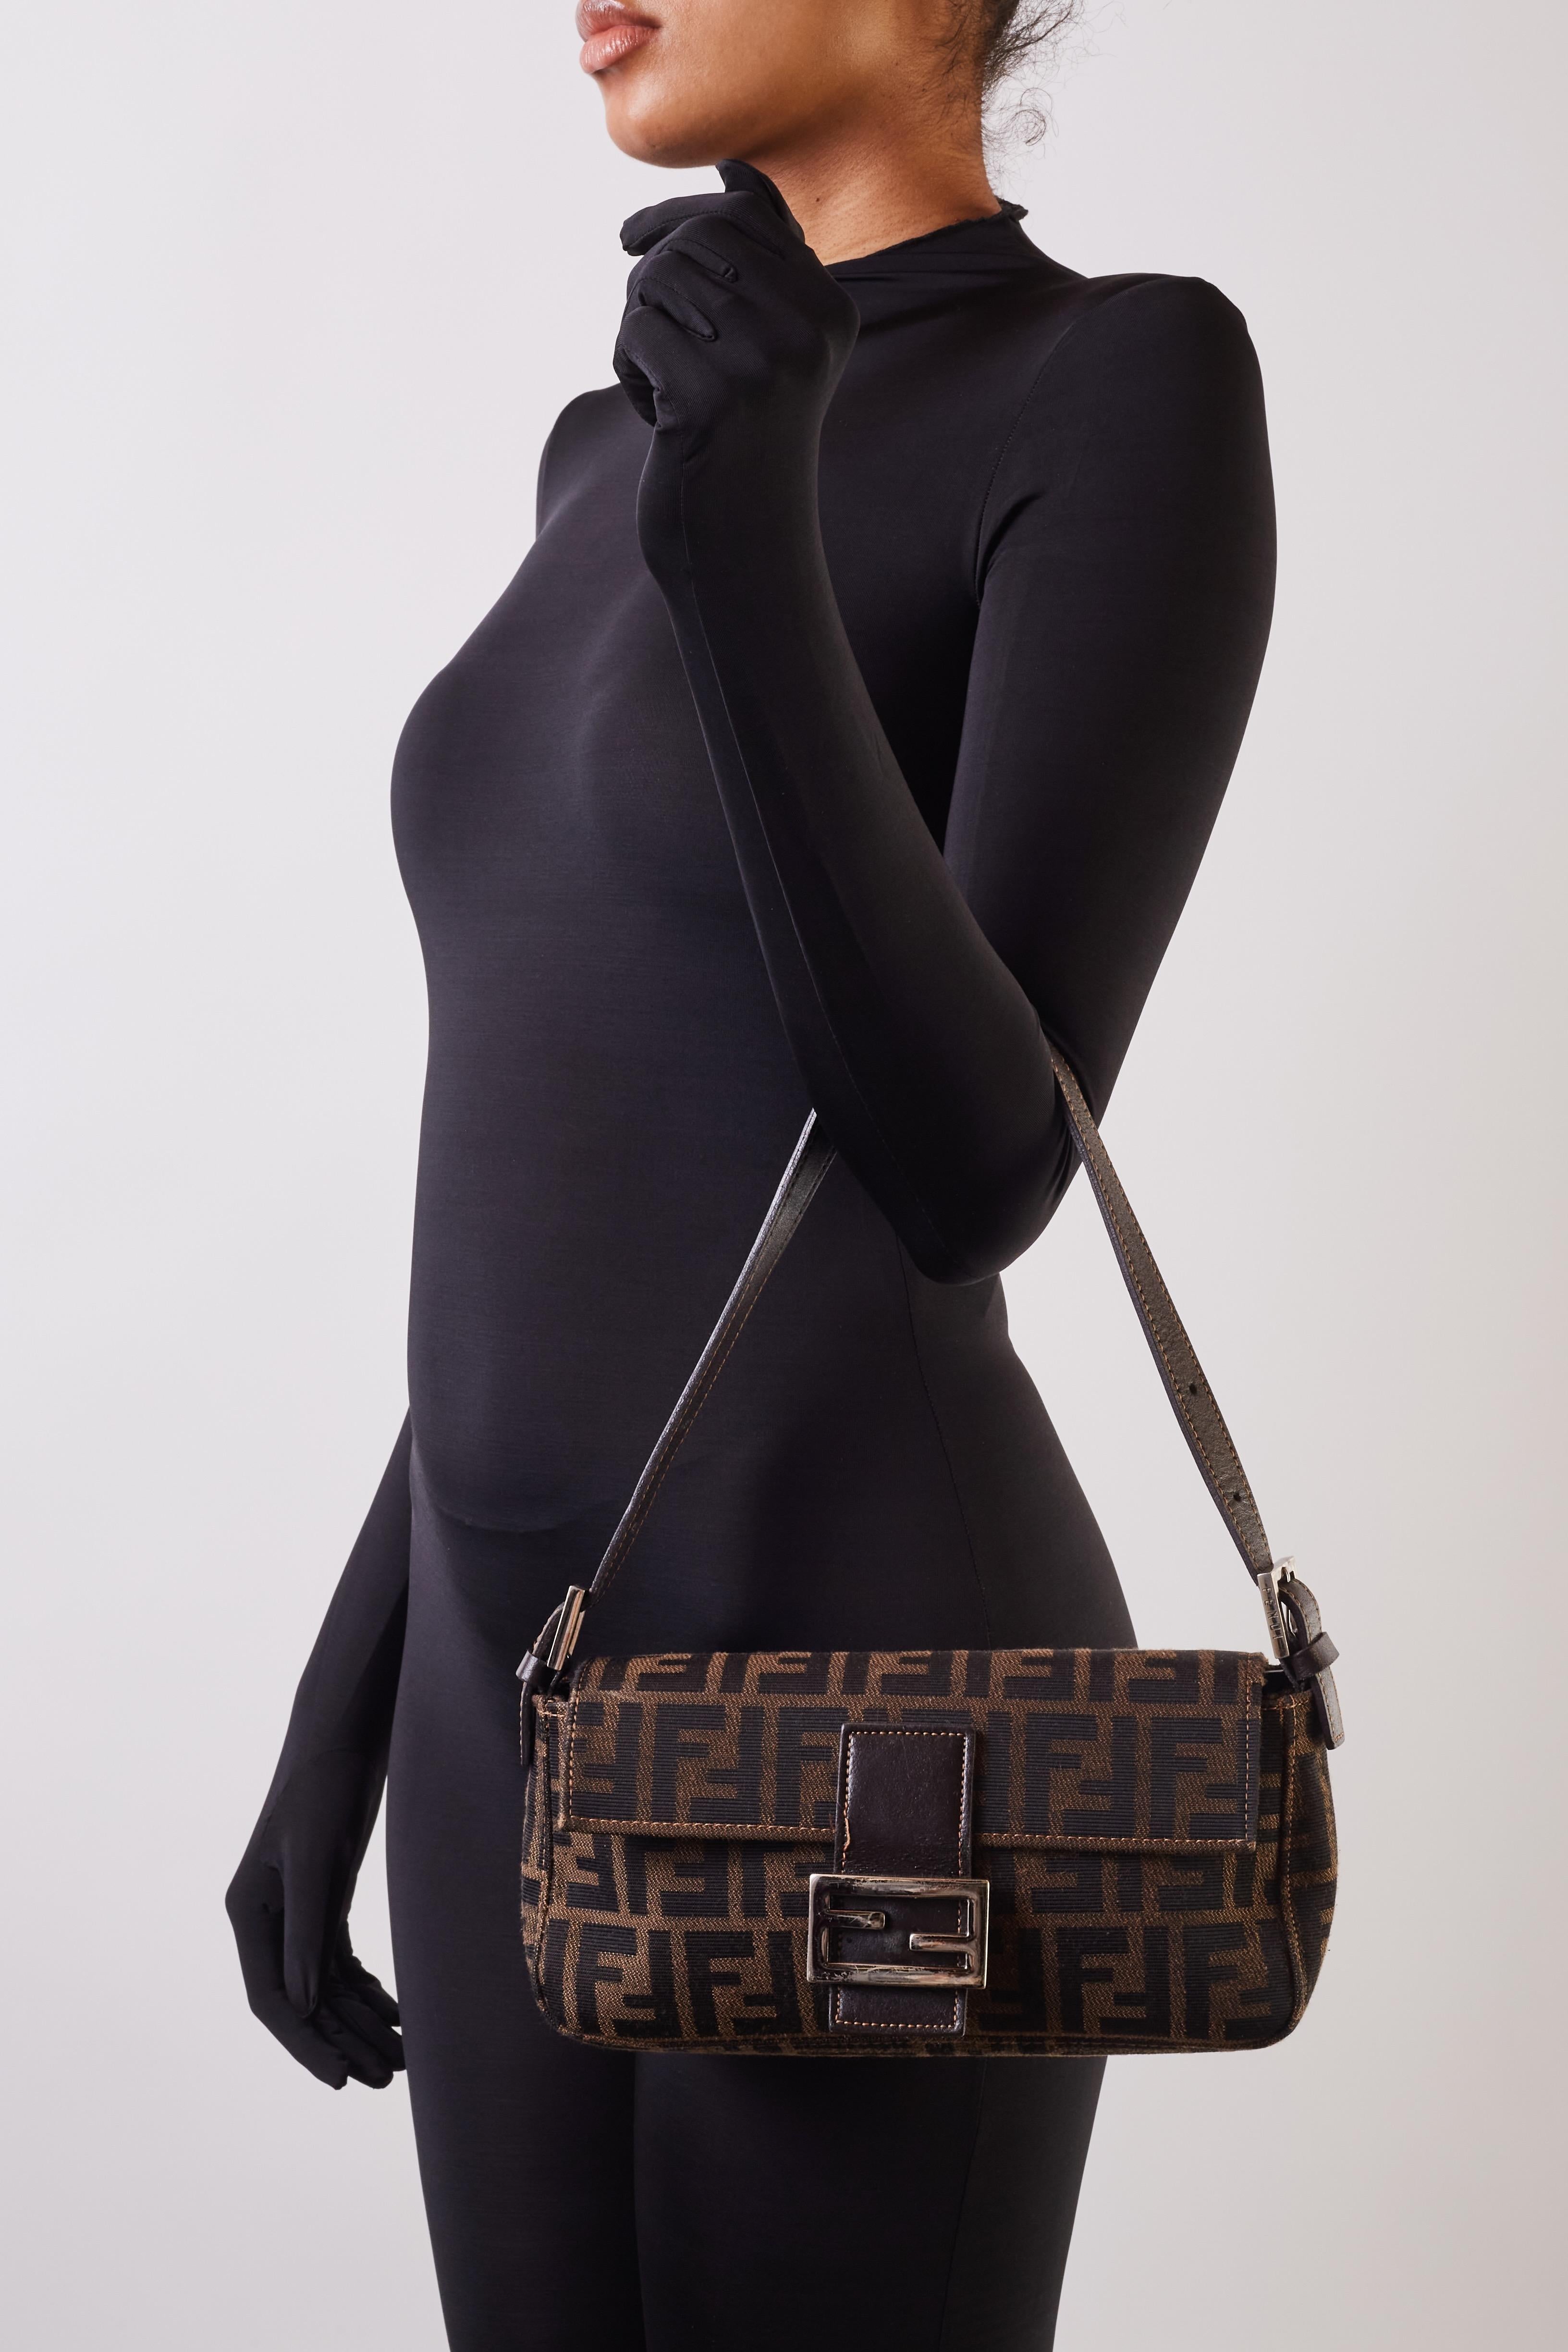 This is an authentic FENDI Zucca Baguette in Tobacco. This stylish baguette is crafted of tobacco-colored Fendi FF on Zucca canvas. The bag features a dark chocolate brown looping leather shoulder strap and trim with a facing flap and polished